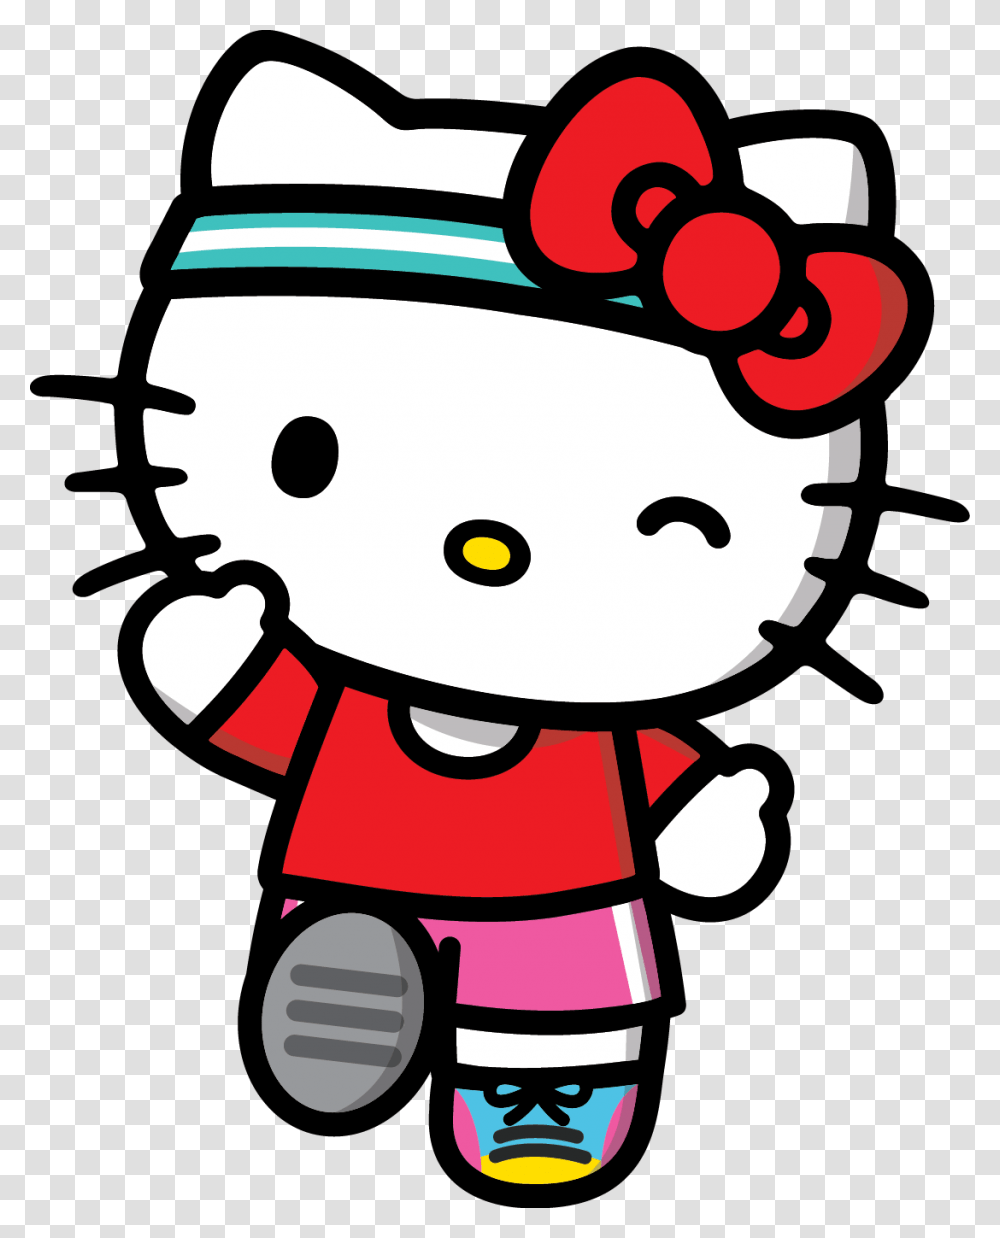 Hello Kitty Images On Hello Kitty Vector, Lawn Mower, Tool, Fireman, Elf Transparent Png